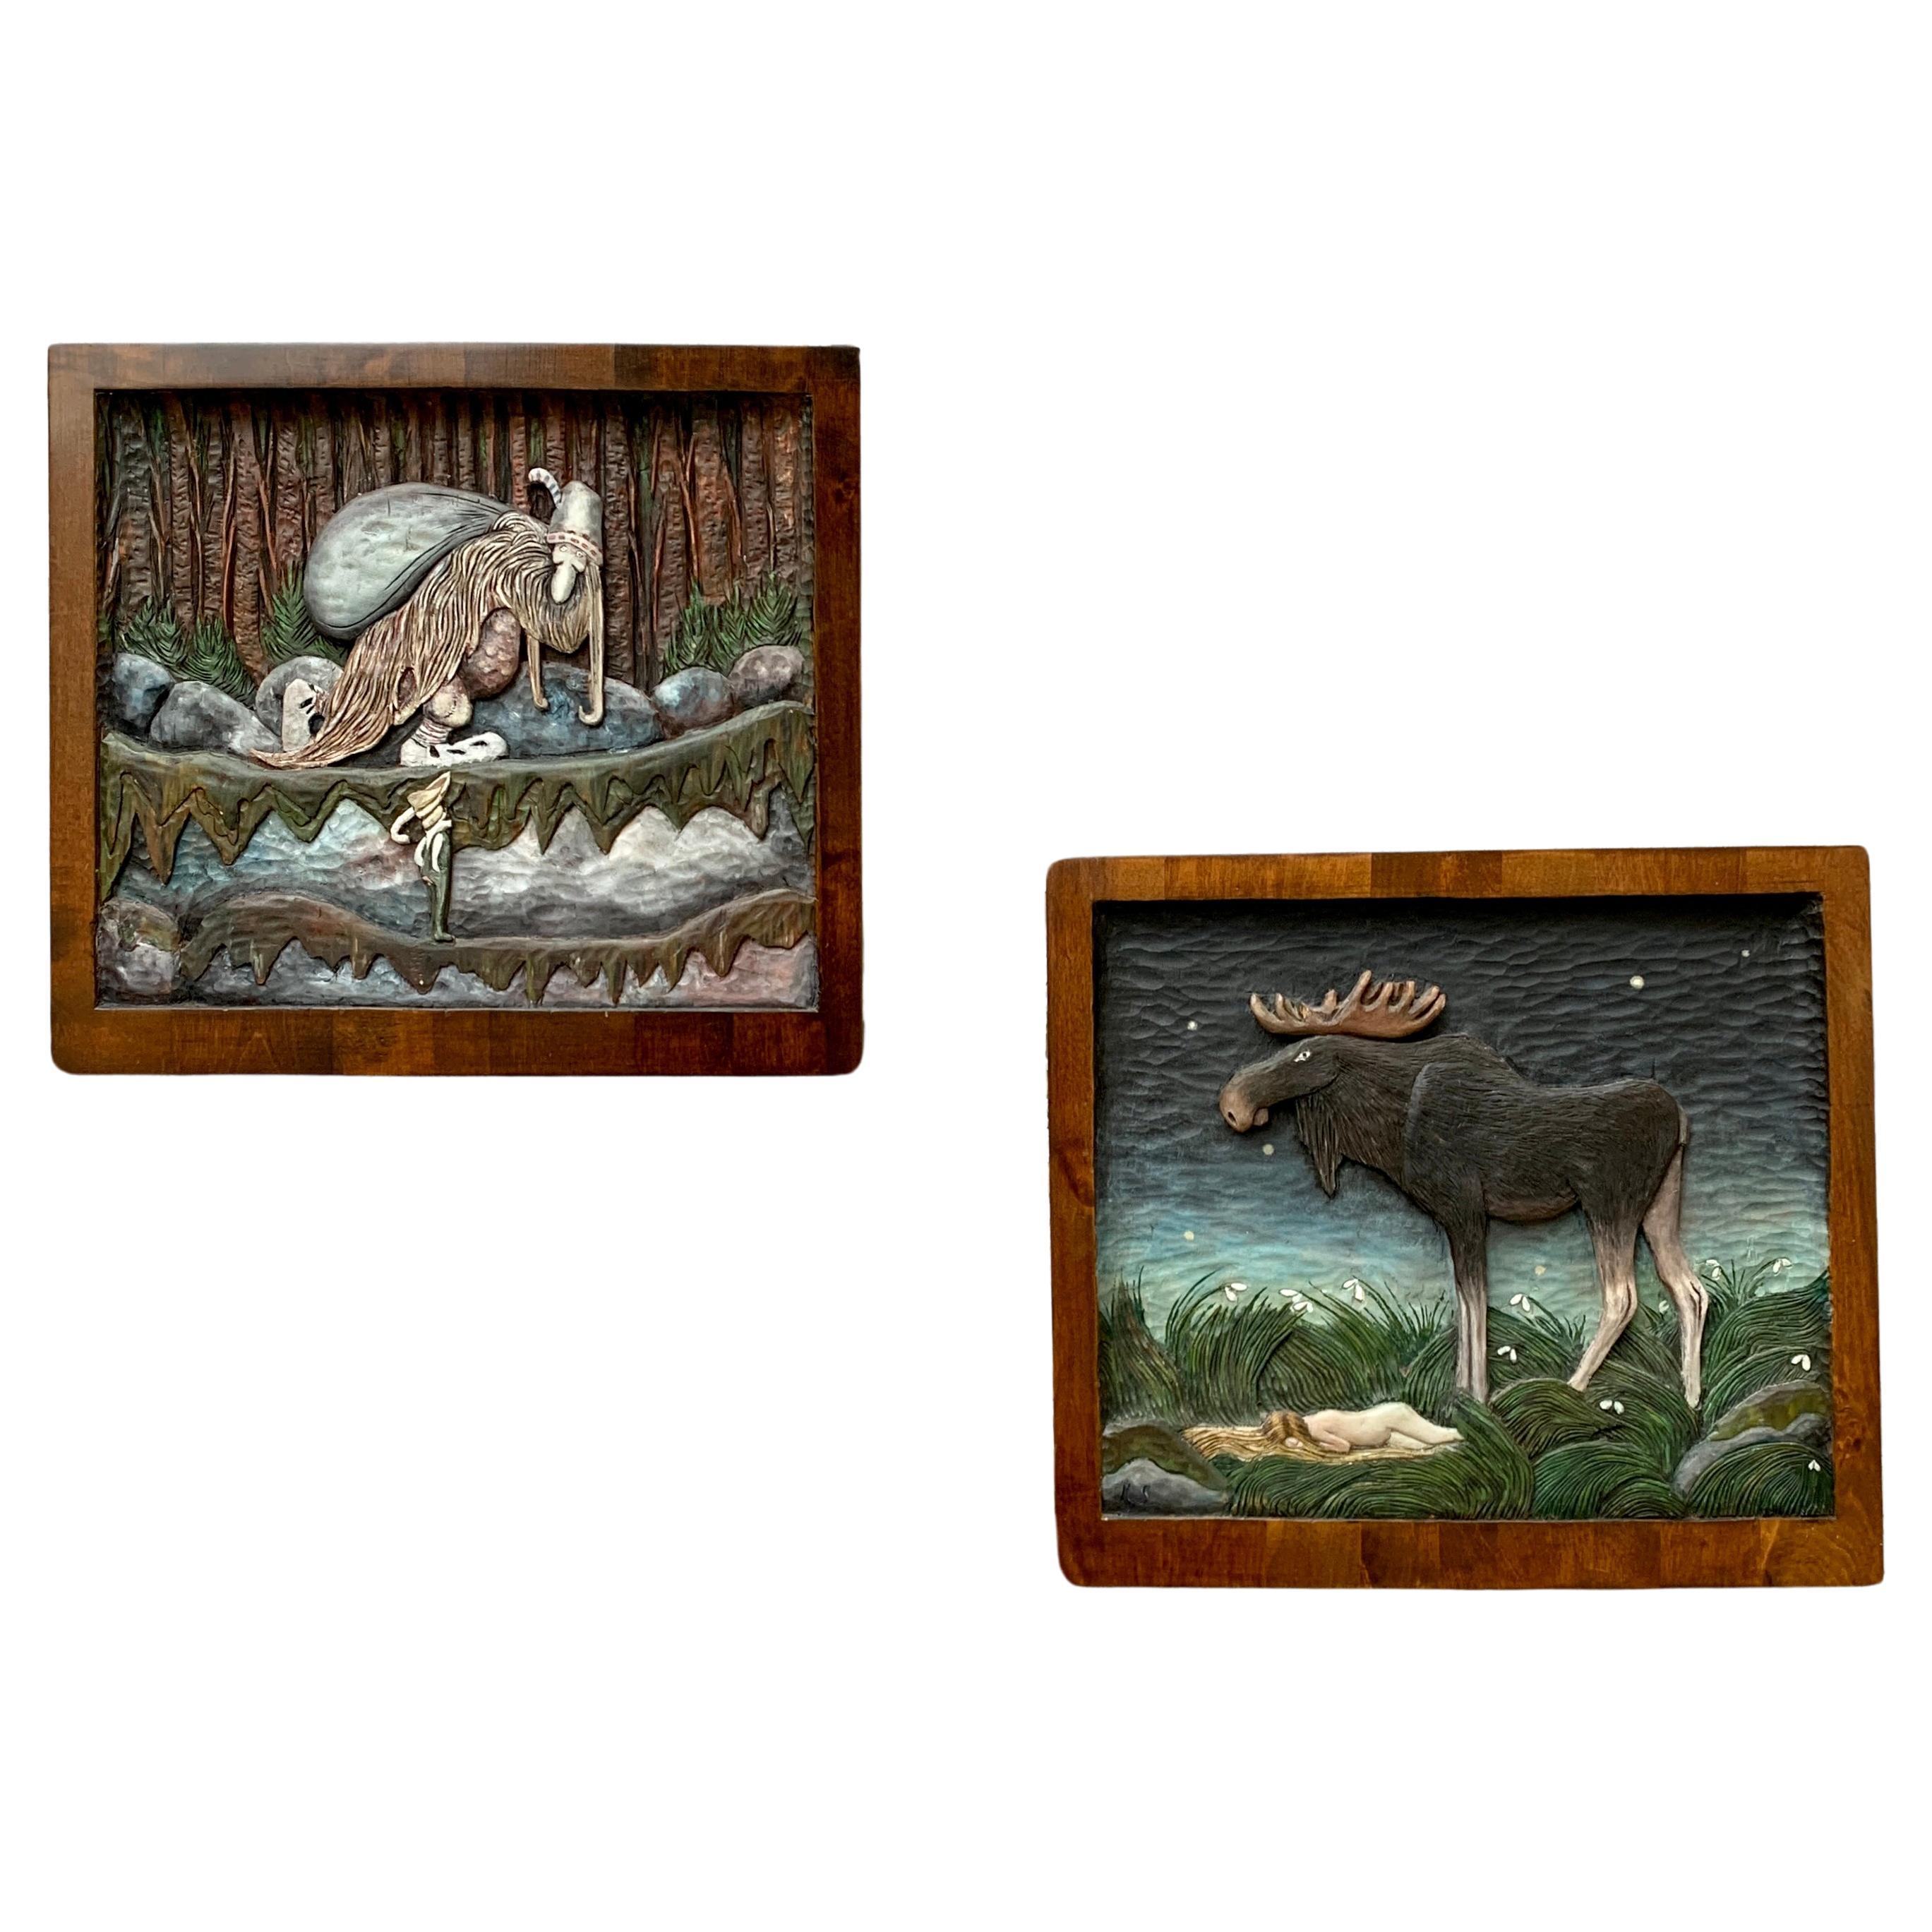 A Pair Of John Bauer Wooden Carved Wall Sculptures